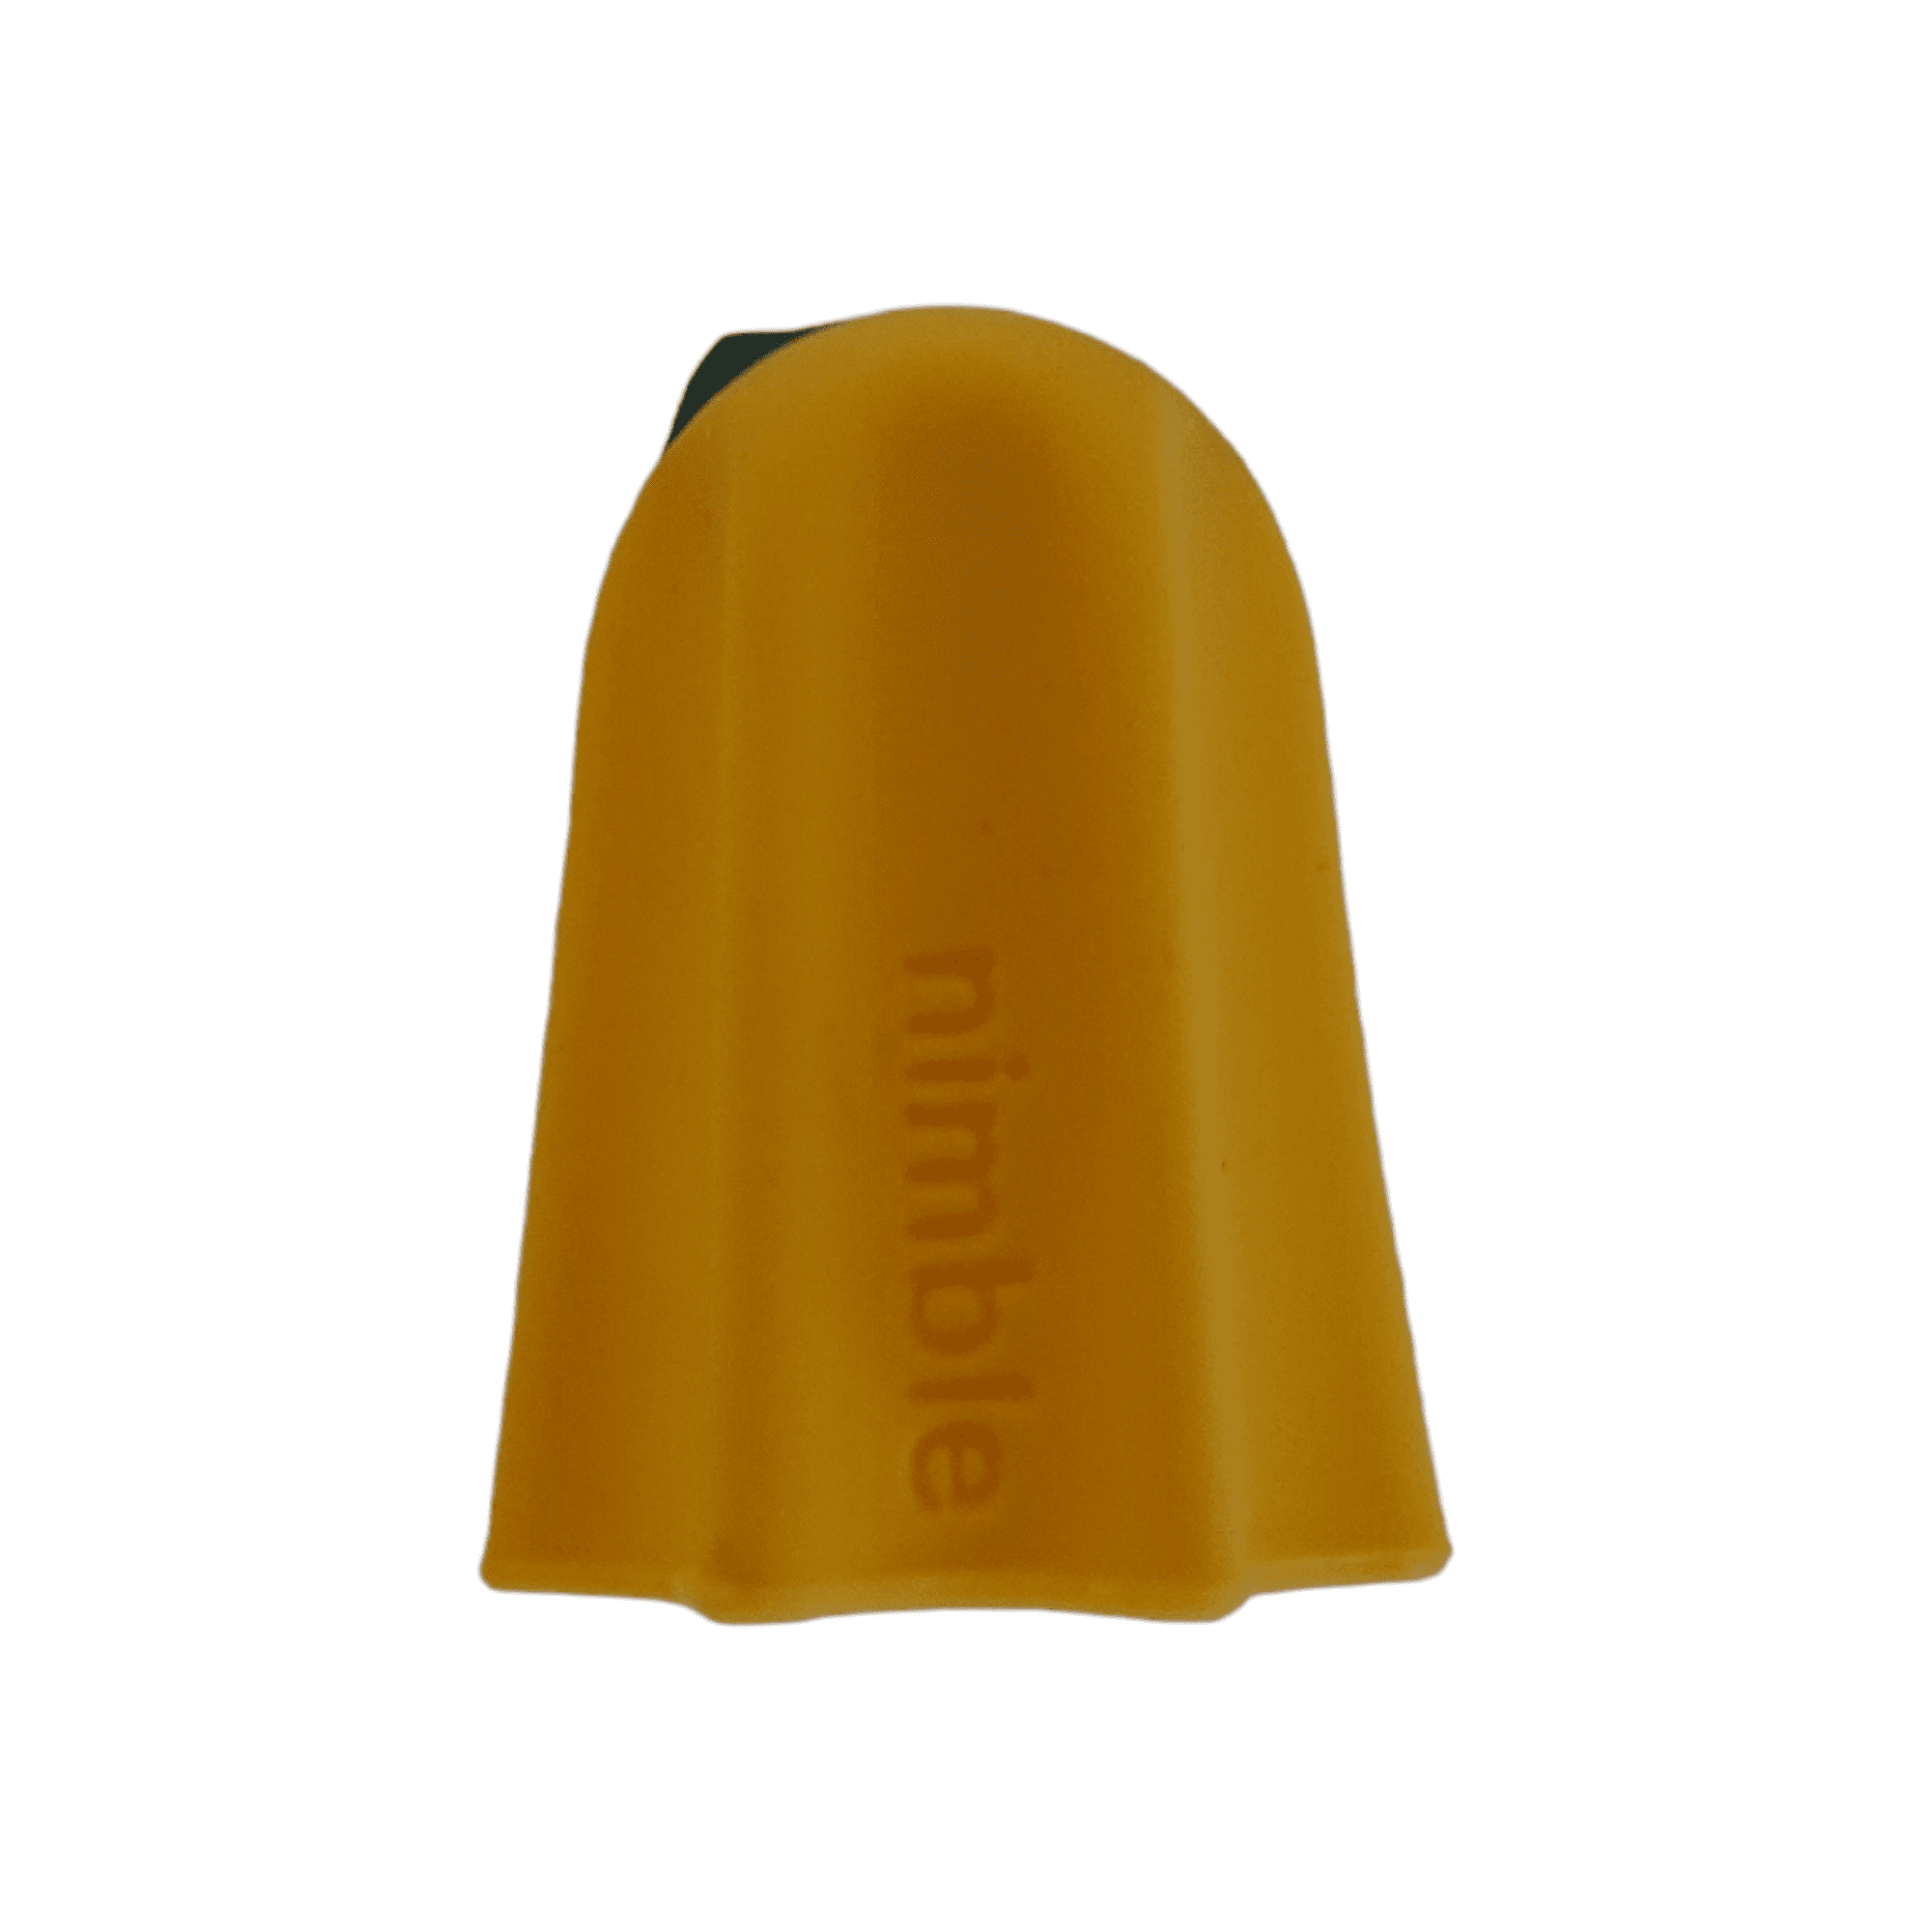 Nimble finger cutter, thimble with tiny blade